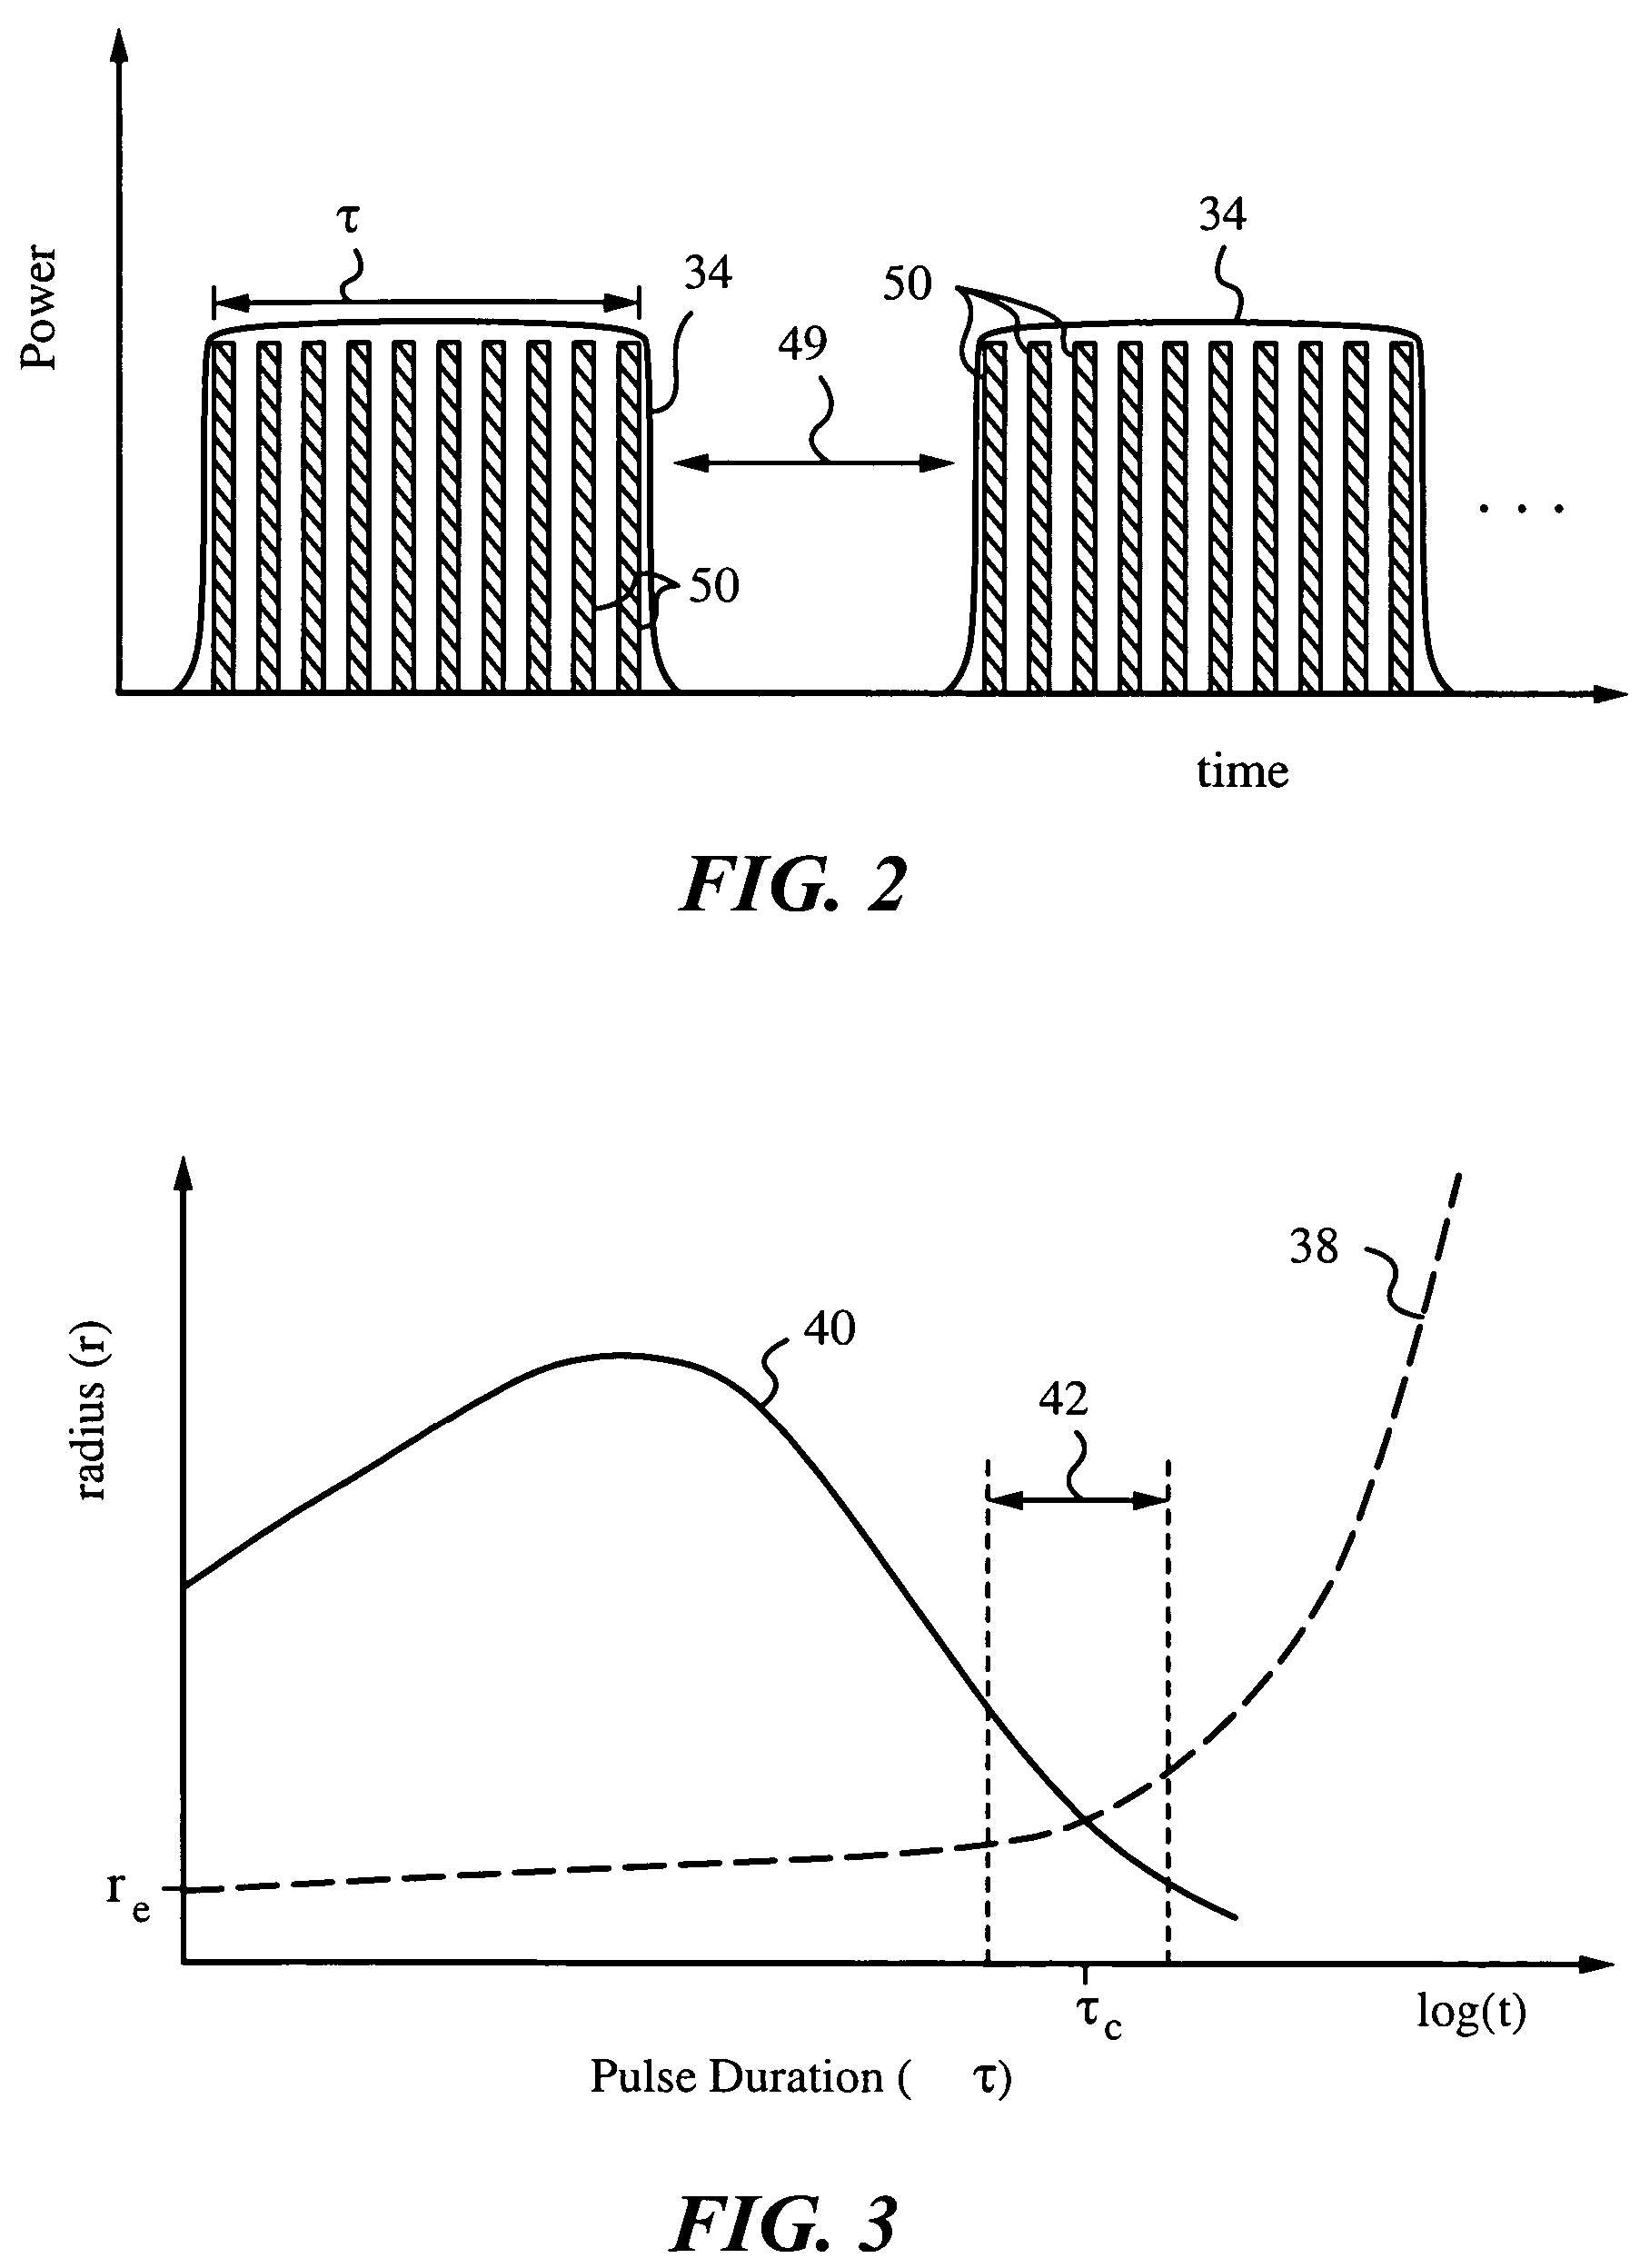 Method and apparatus for plasma-mediated thermo-electrical ablation